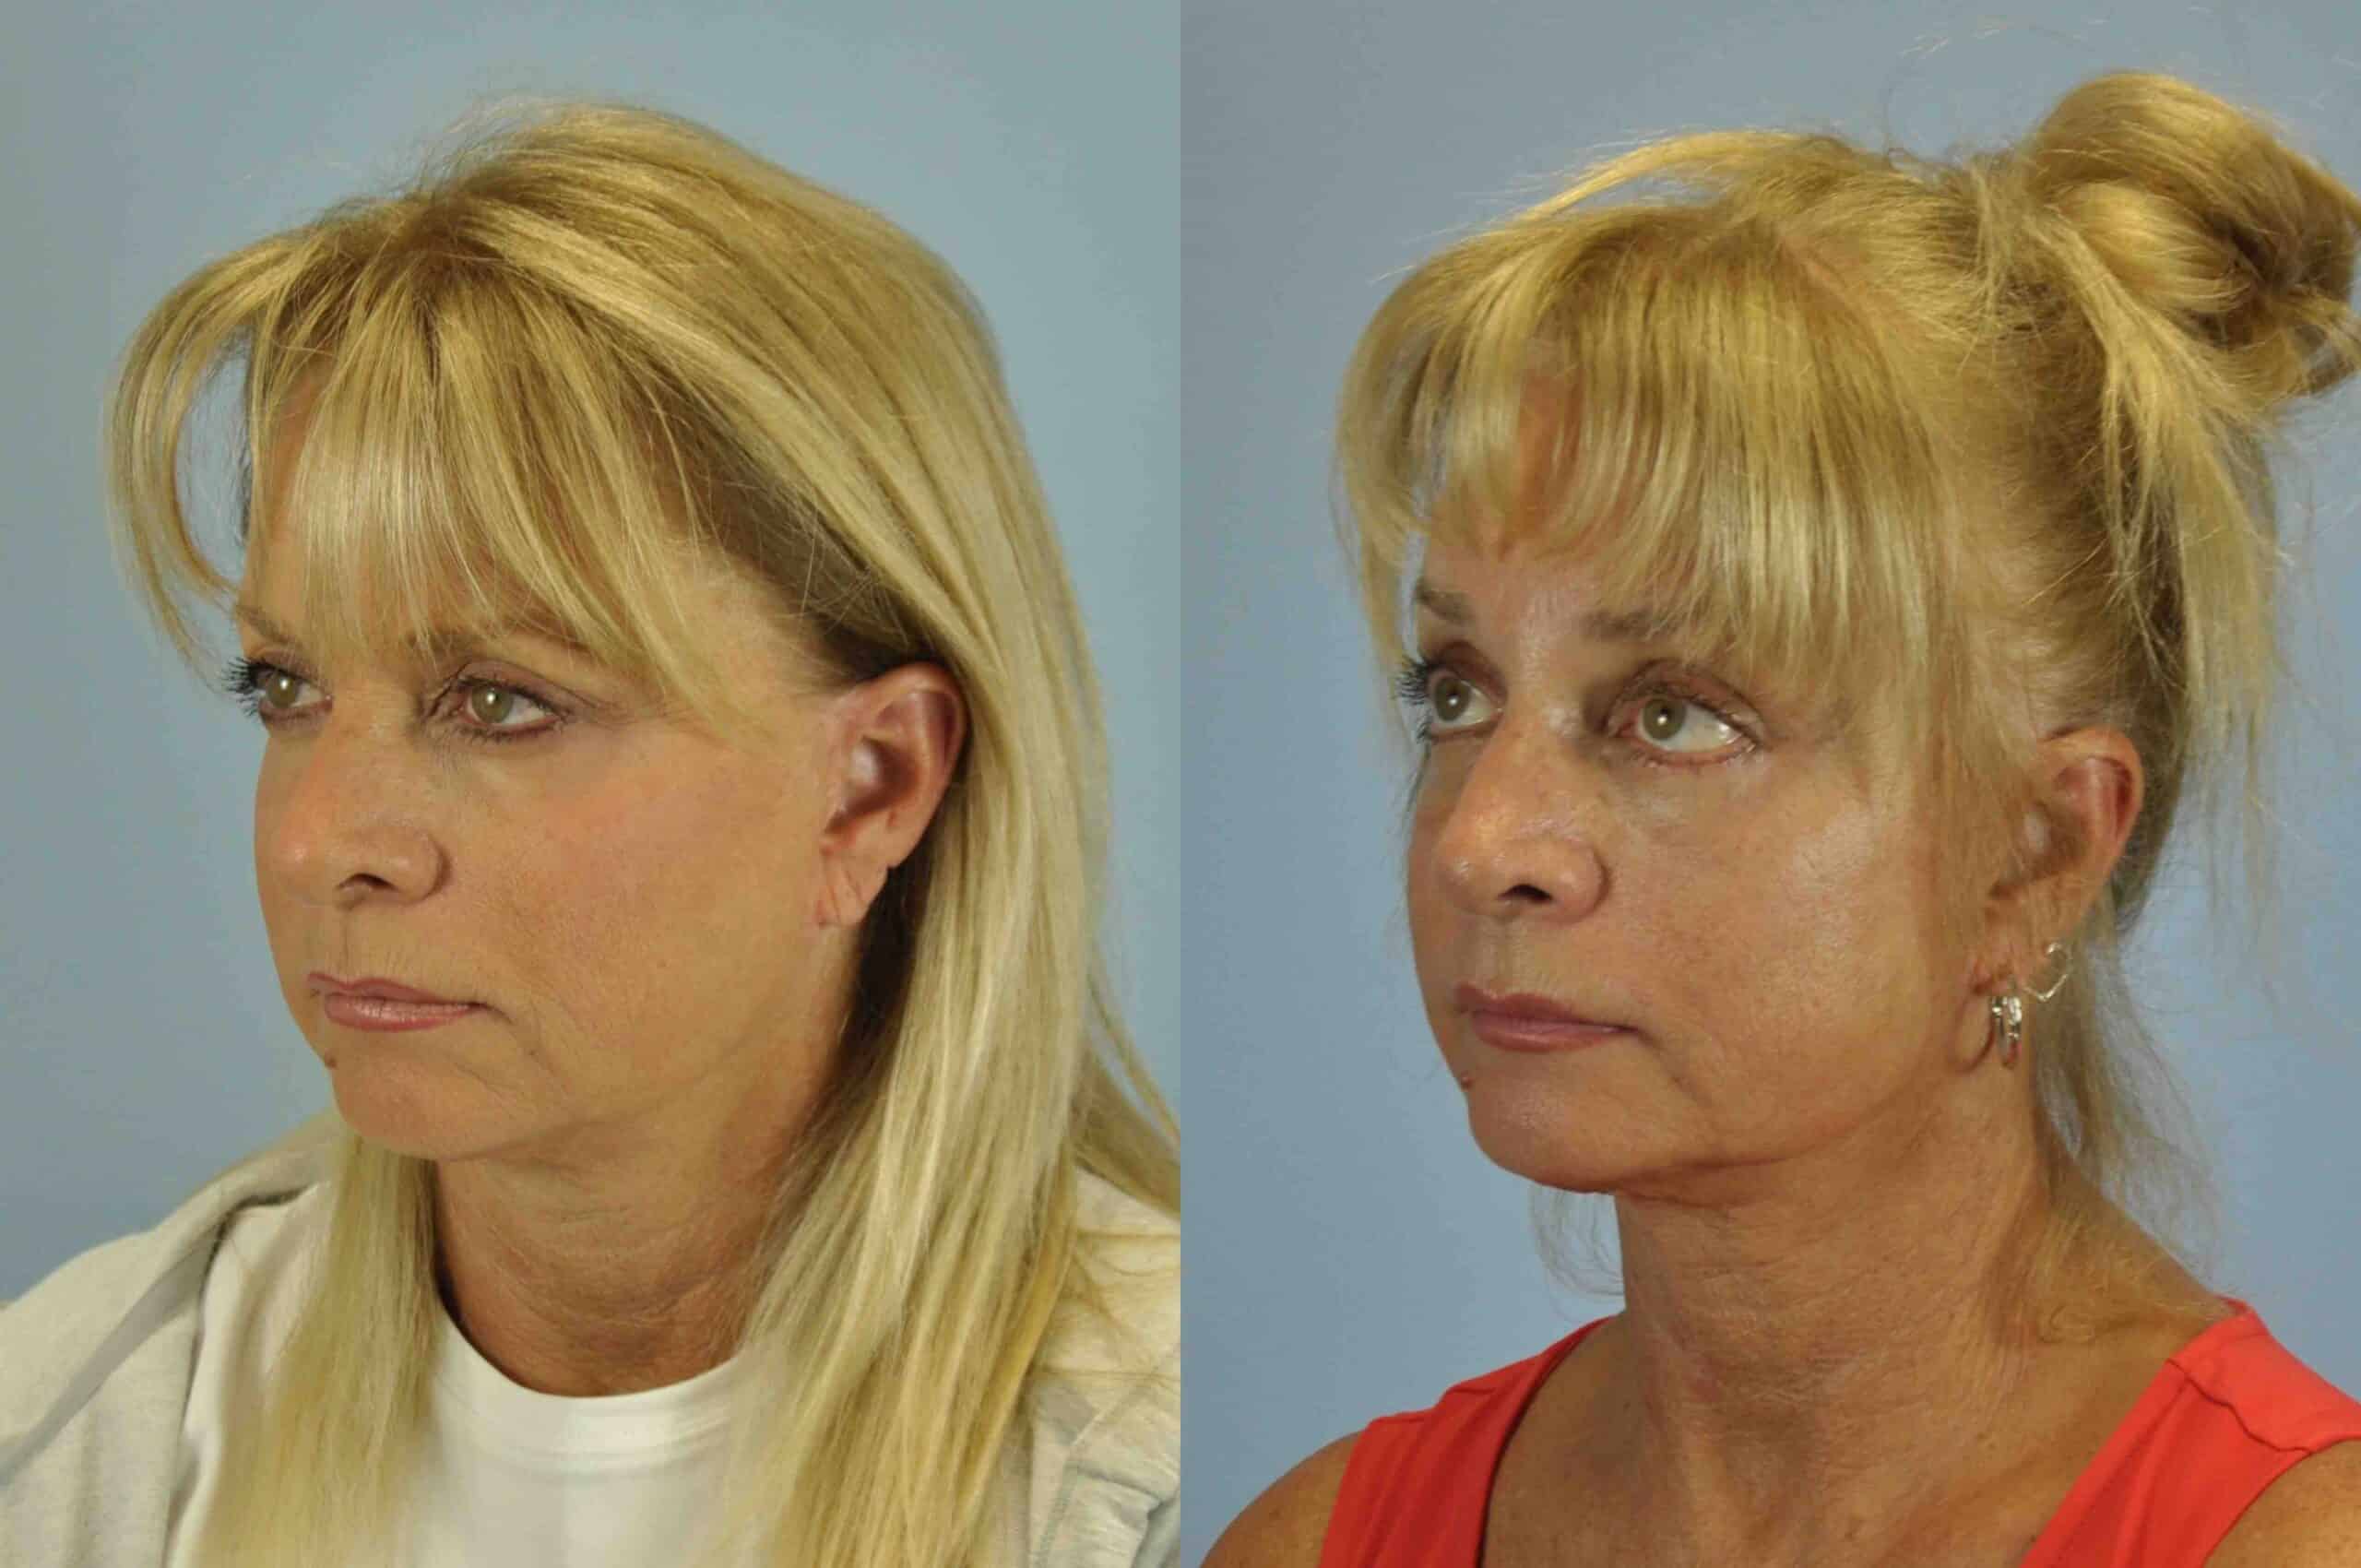 Before and after, 2 mo post op from Lower Blepharoplasty, Canthopexy, Brow Lift performed by Dr. Paul Vanek (diagonal view)